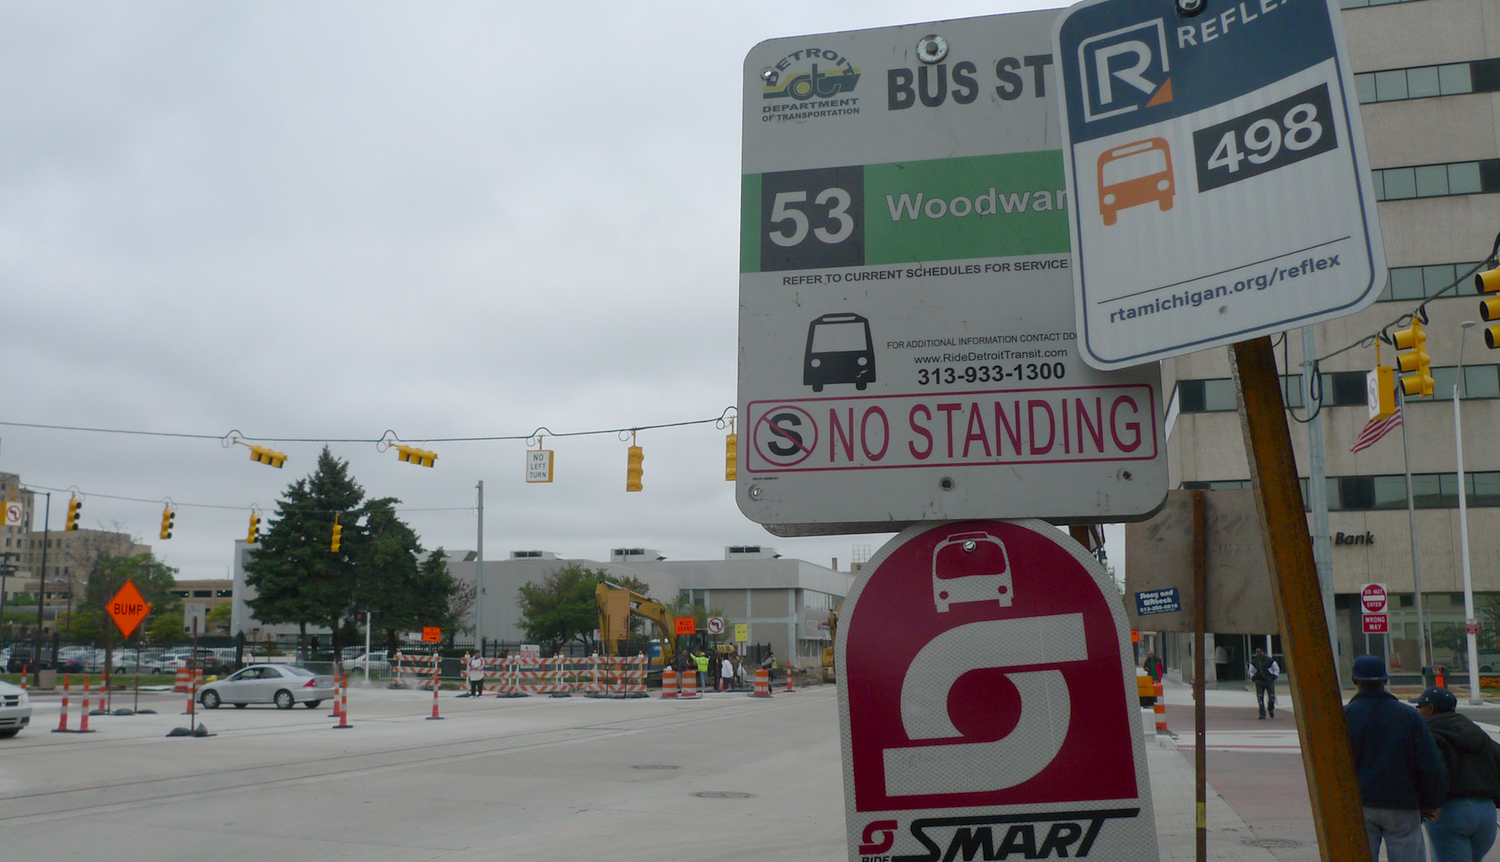  A vote to fund the RTA would marry DDOT and SMART, the city and suburban bus services. Those buses, and the RTA’s new RefleX service, all travel along Woodward Avenue. (Bridge photo by Nancy Derringer)